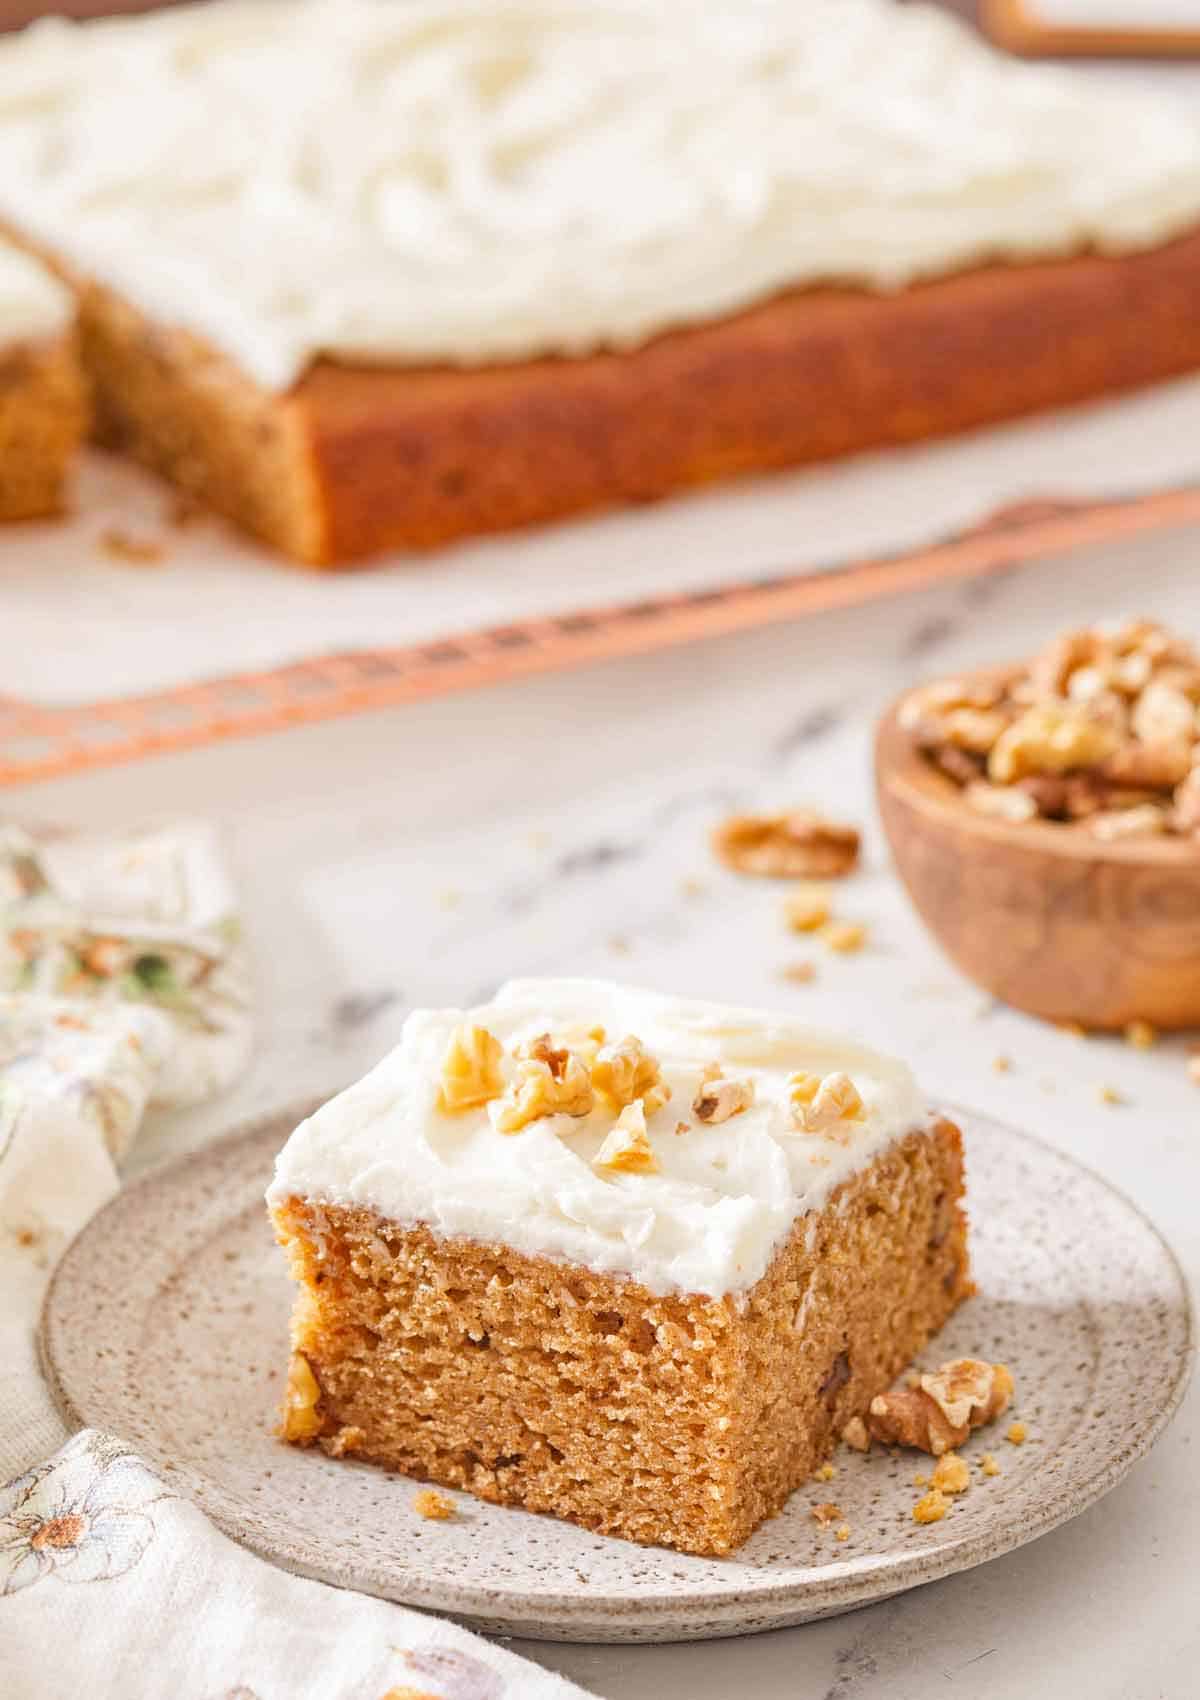 A plate with a piece of applesauce cake with some chopped walnuts on the frosting.